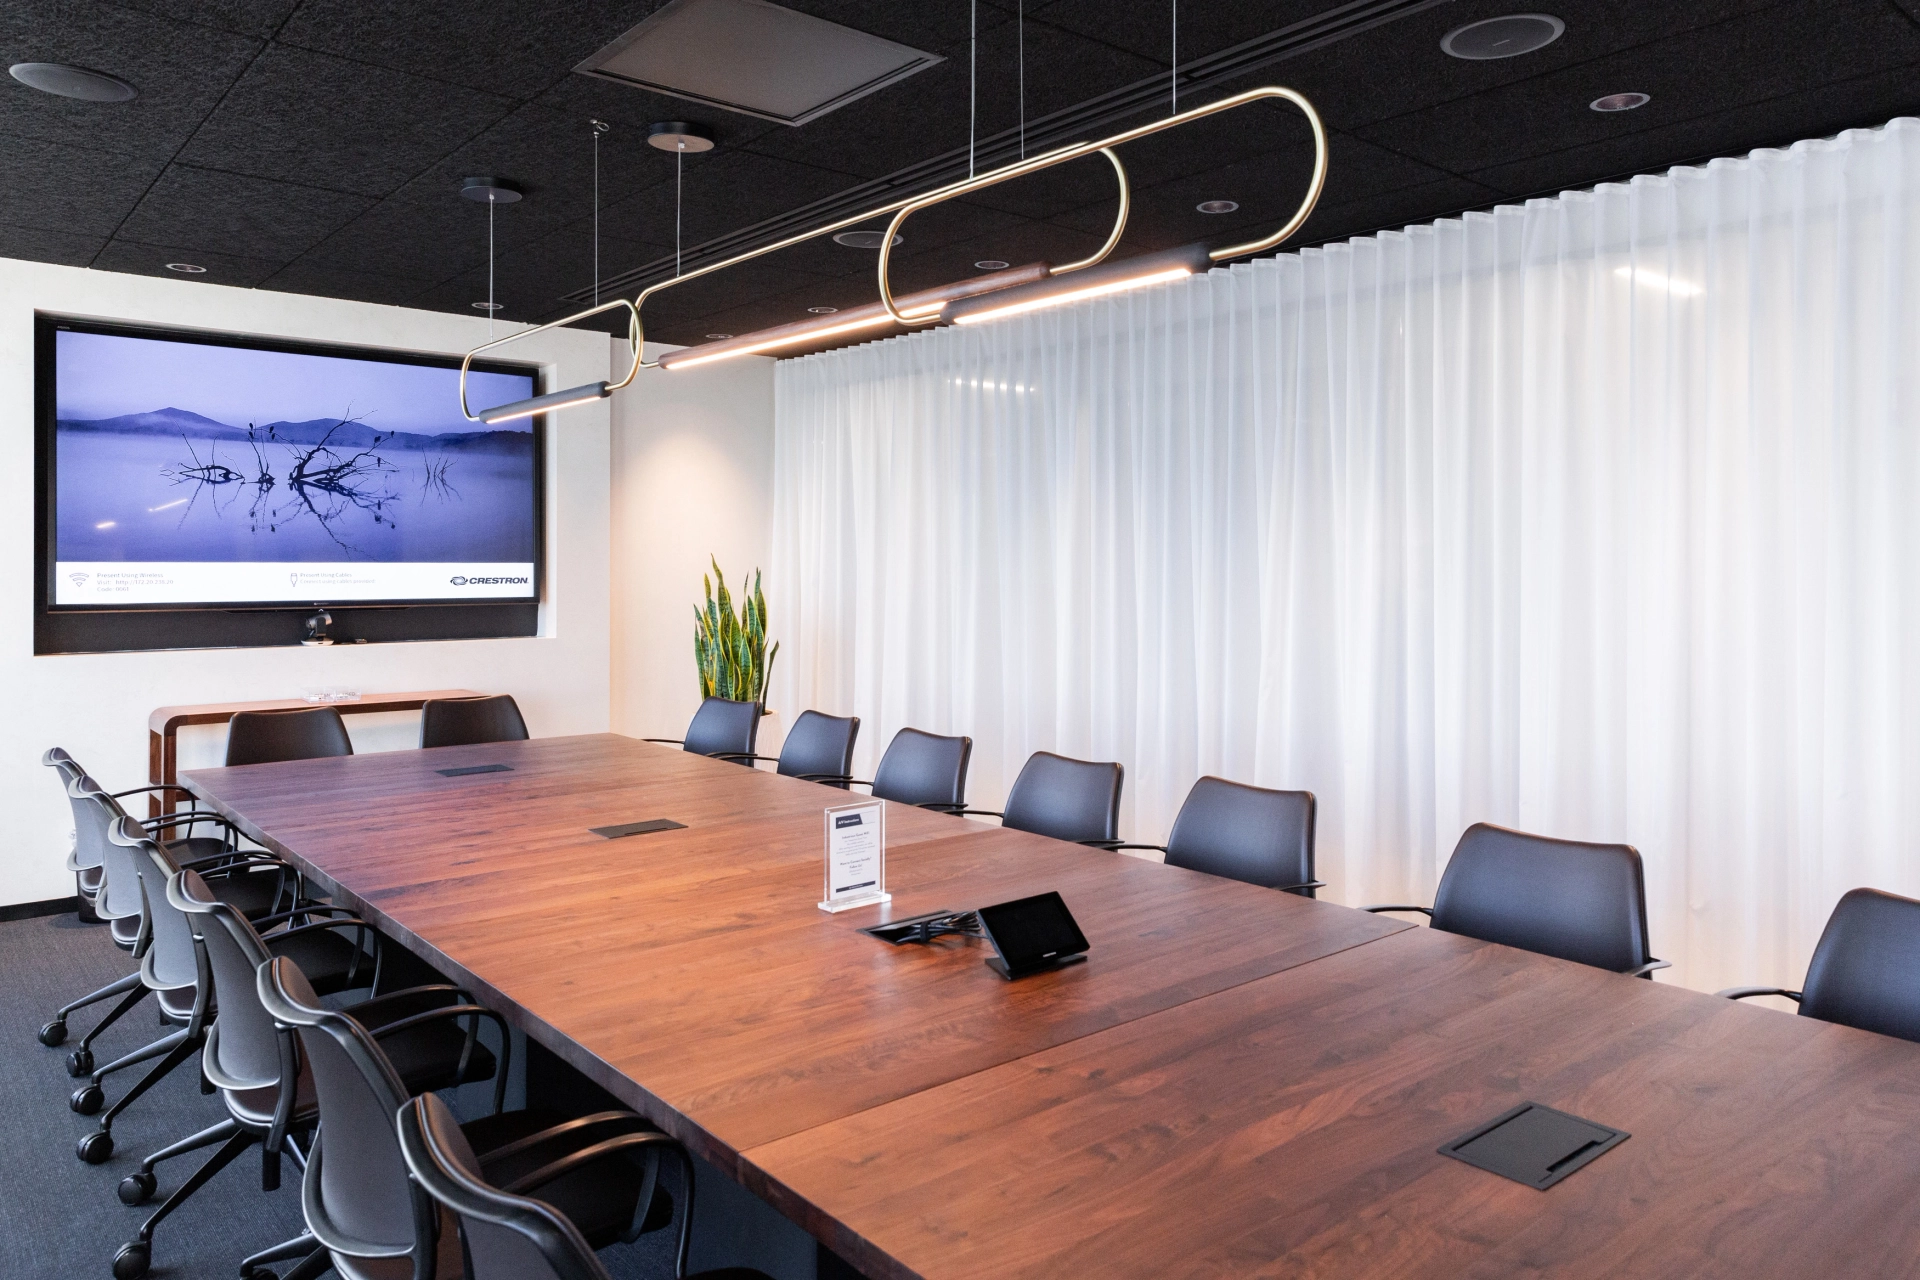 A coworking office in Chicago featuring a conference room with a large screen on the wall.